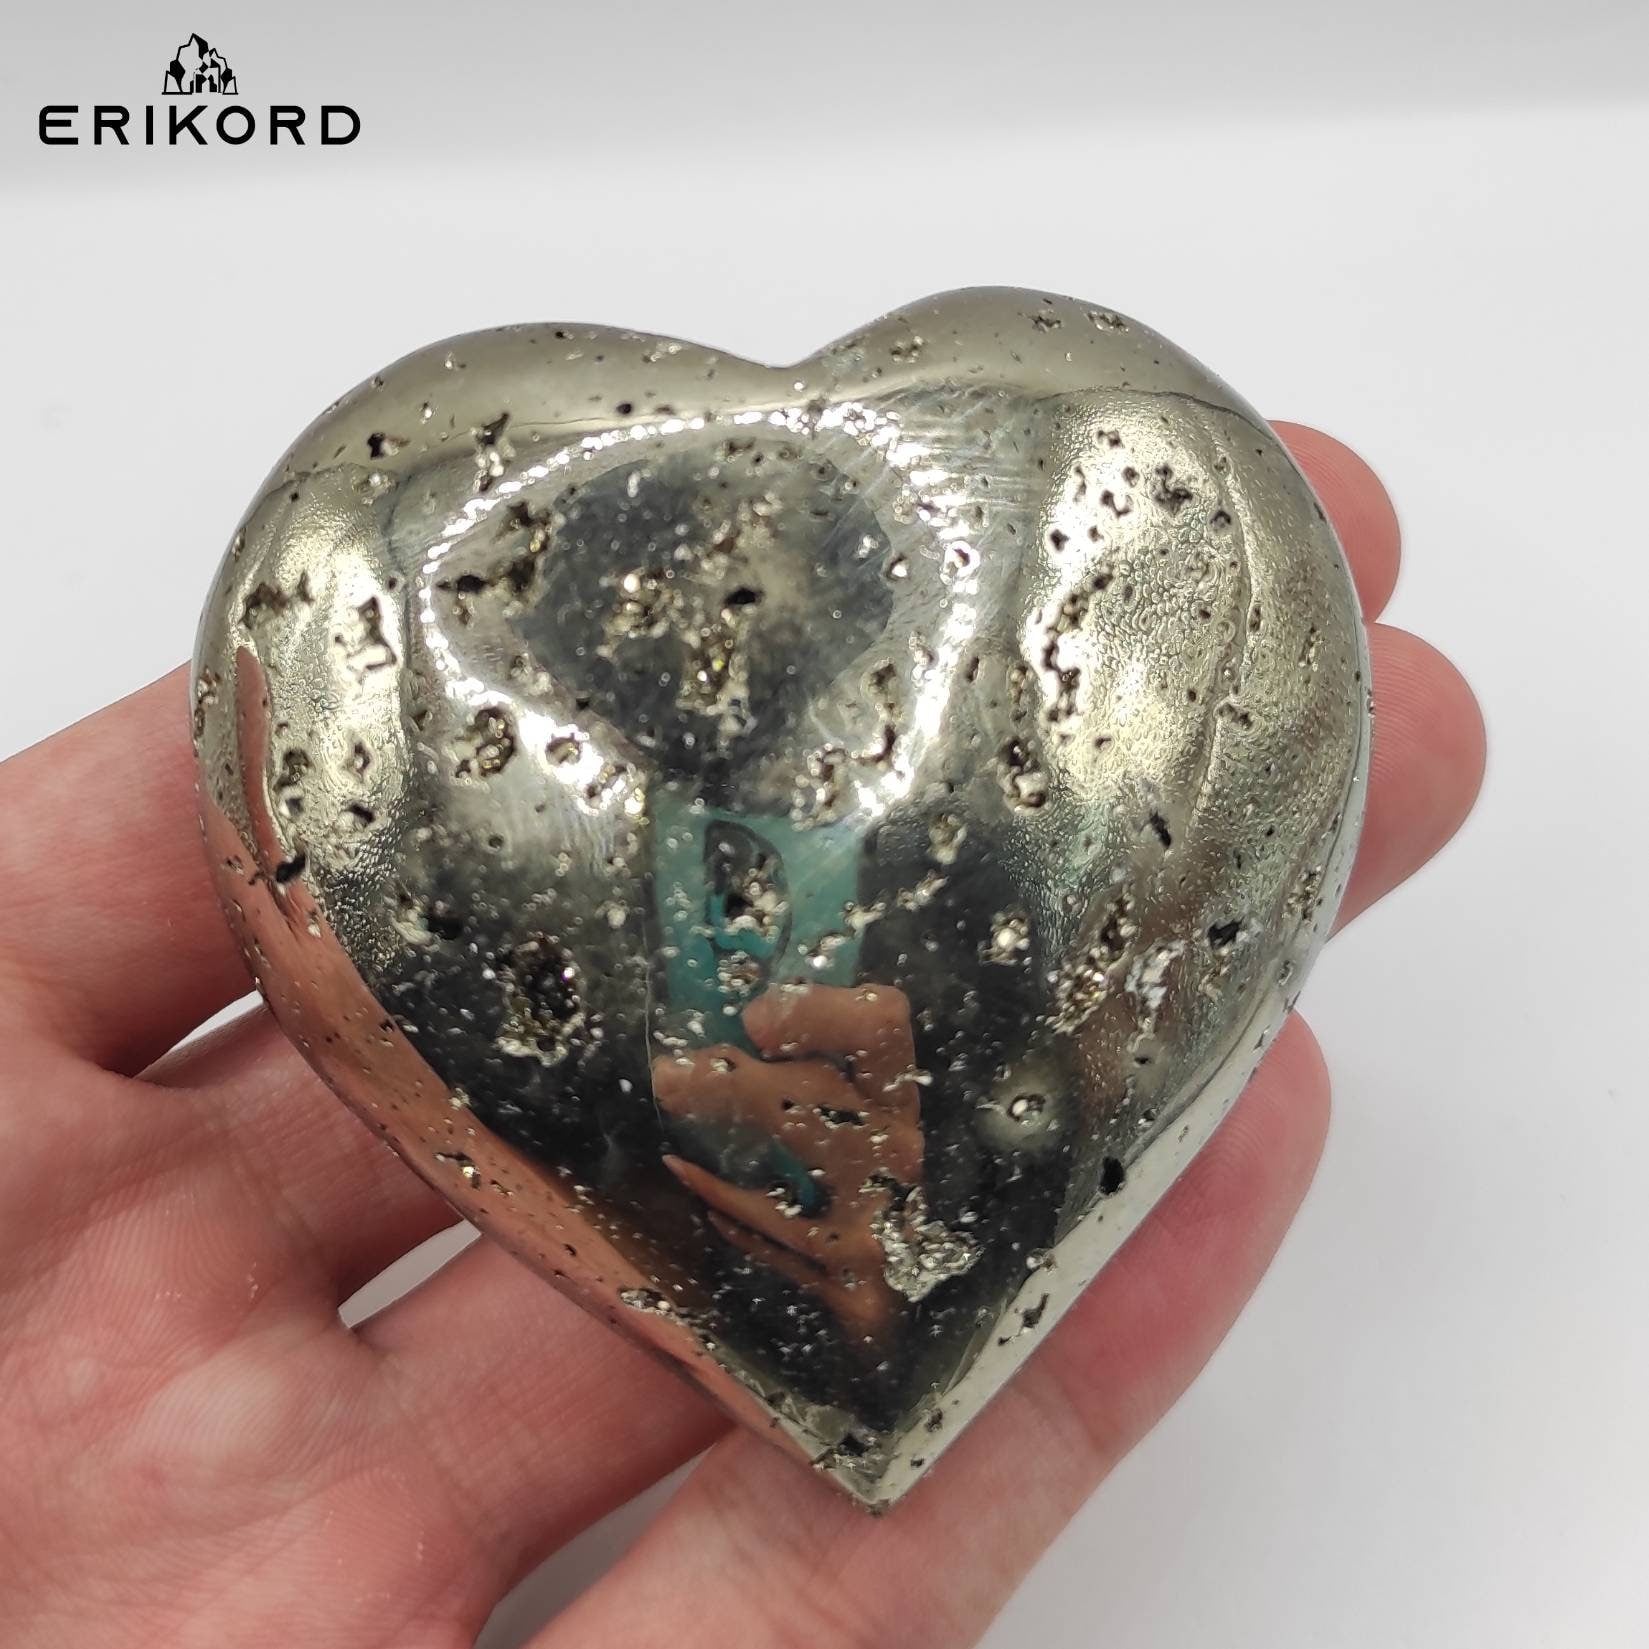 272g Pyrite Heart from Peru - Polished Crystal Heart - Polished Mineral Specimen - Natural Pyrite Mined and Polished in Peru - Silver Pyrite